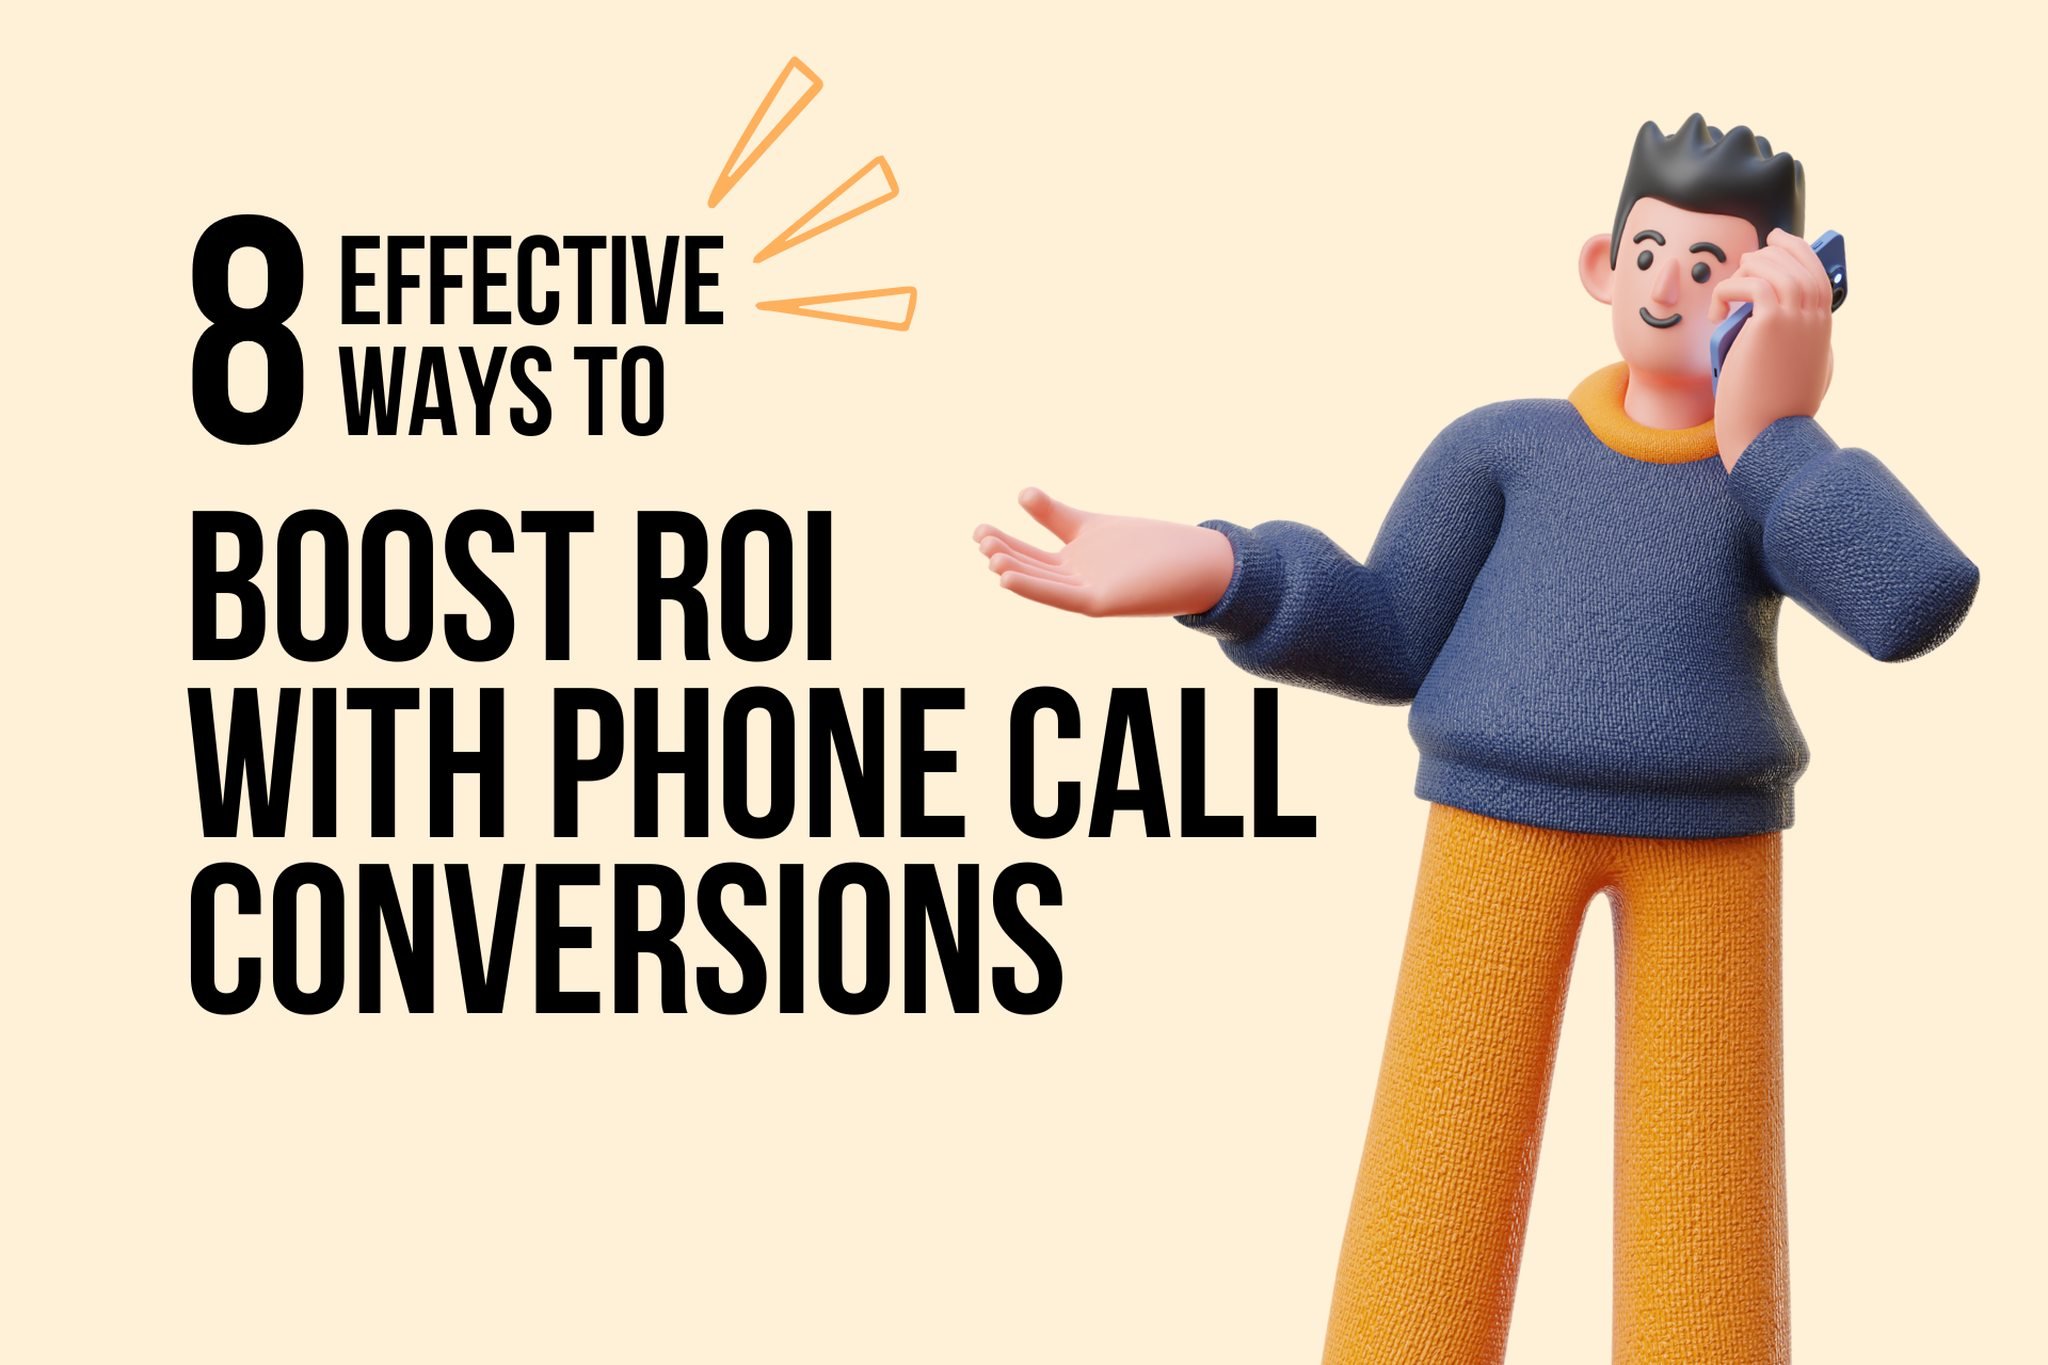 why you should drive more phone call conversions to boost your roi a man talking on the phone a graphic representation of how phone call conversions increase conversions